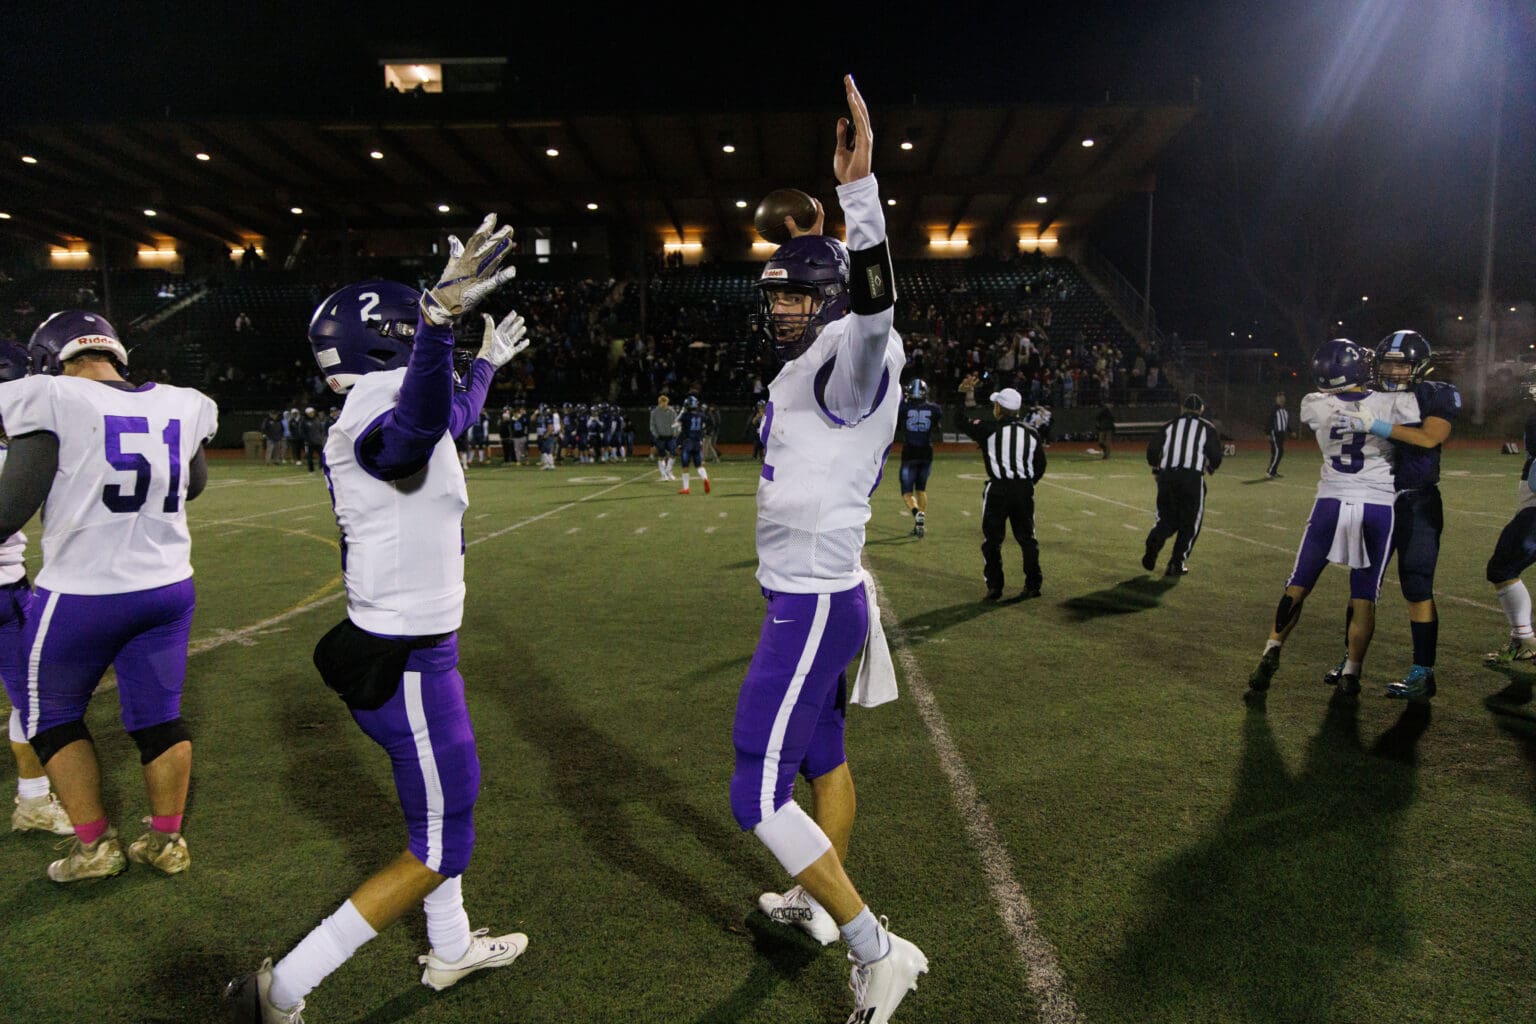 Nooksack Valley’s Joey Brown, right, and Kasey Newton celebrate with their arms stretched upwards.